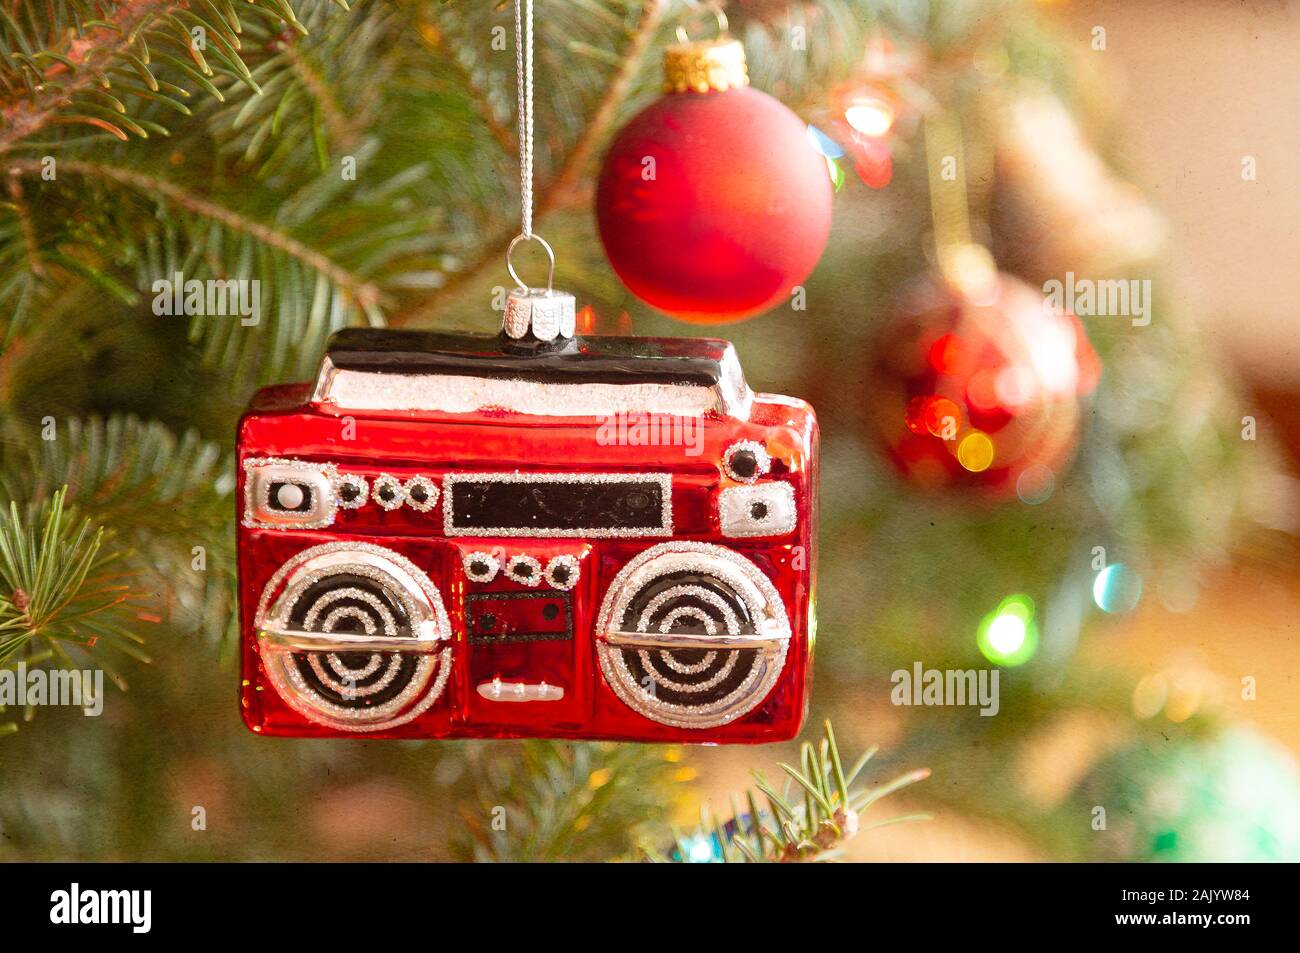 A christmas ornament in the shape of a radio or boom box hanging on the Christmas tree. Texture added. Stock Photo